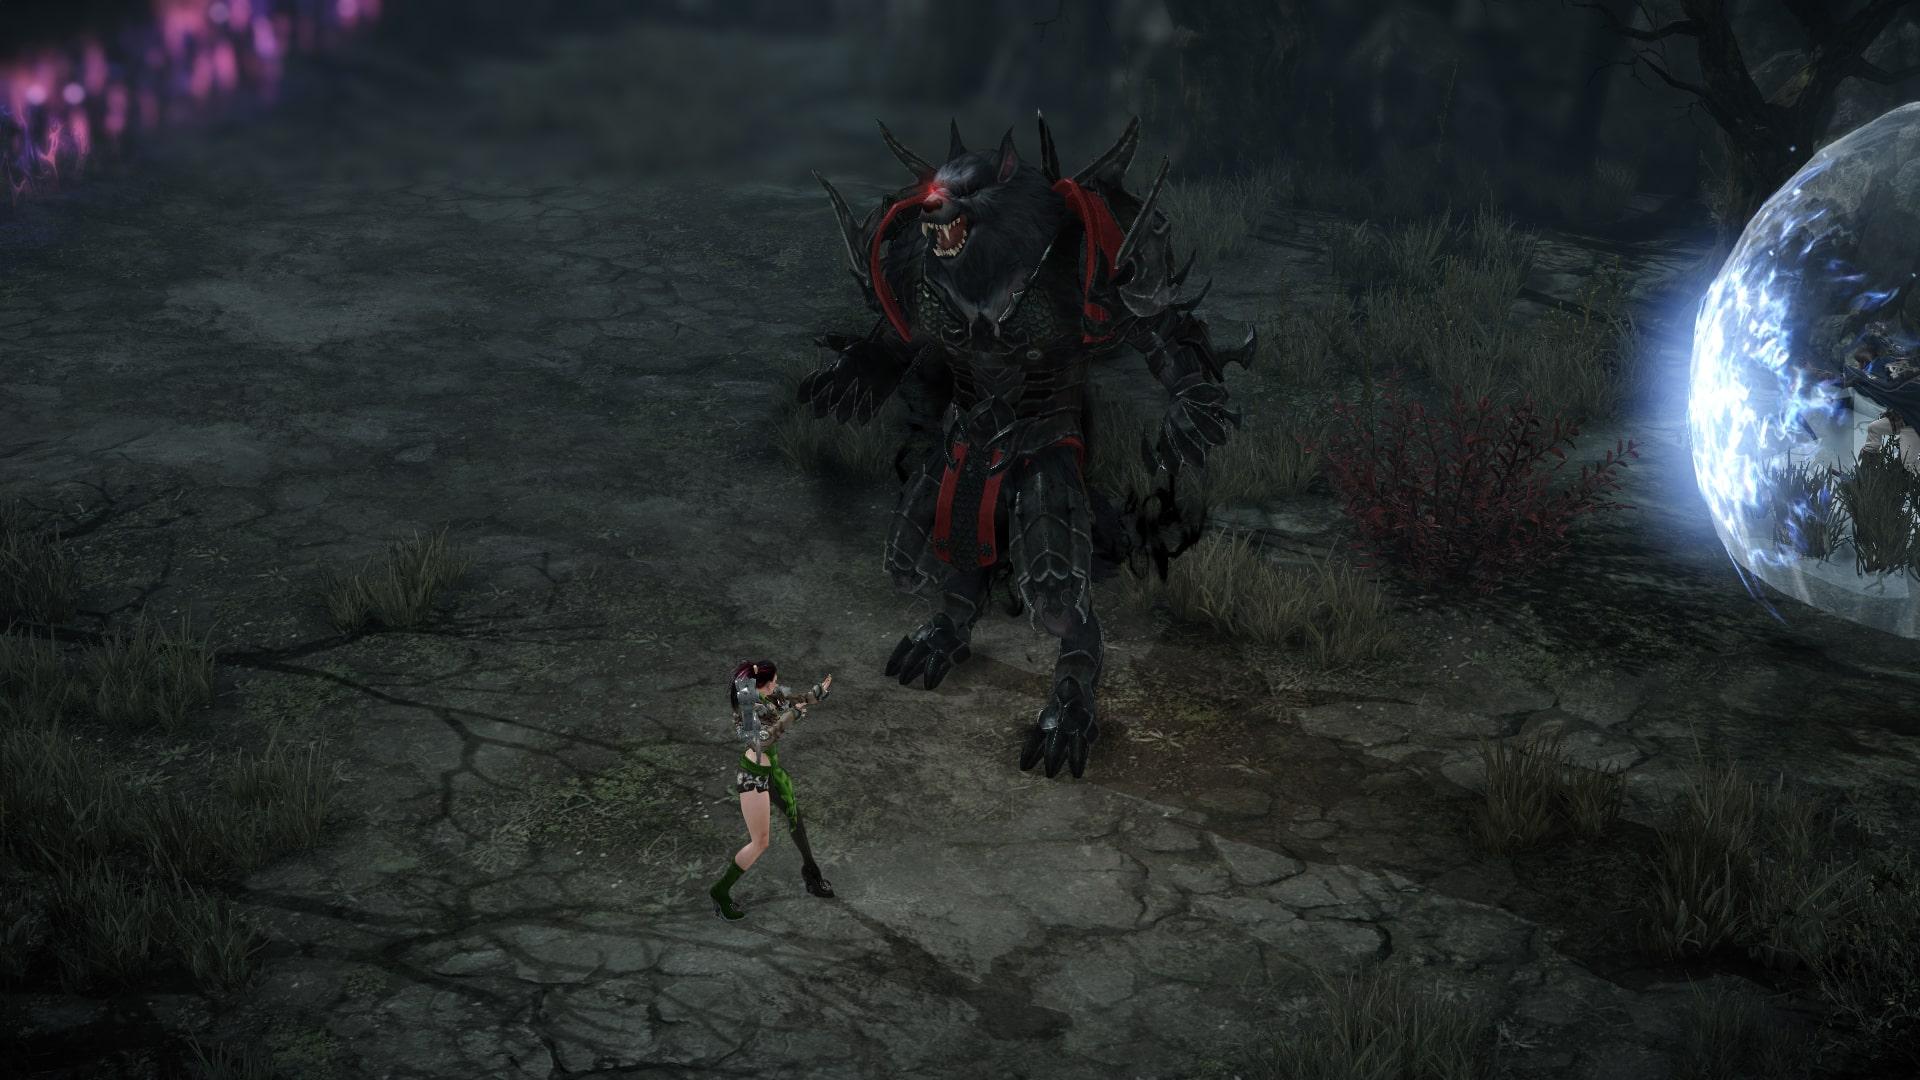 lost ark soulfist fights large wolf monster